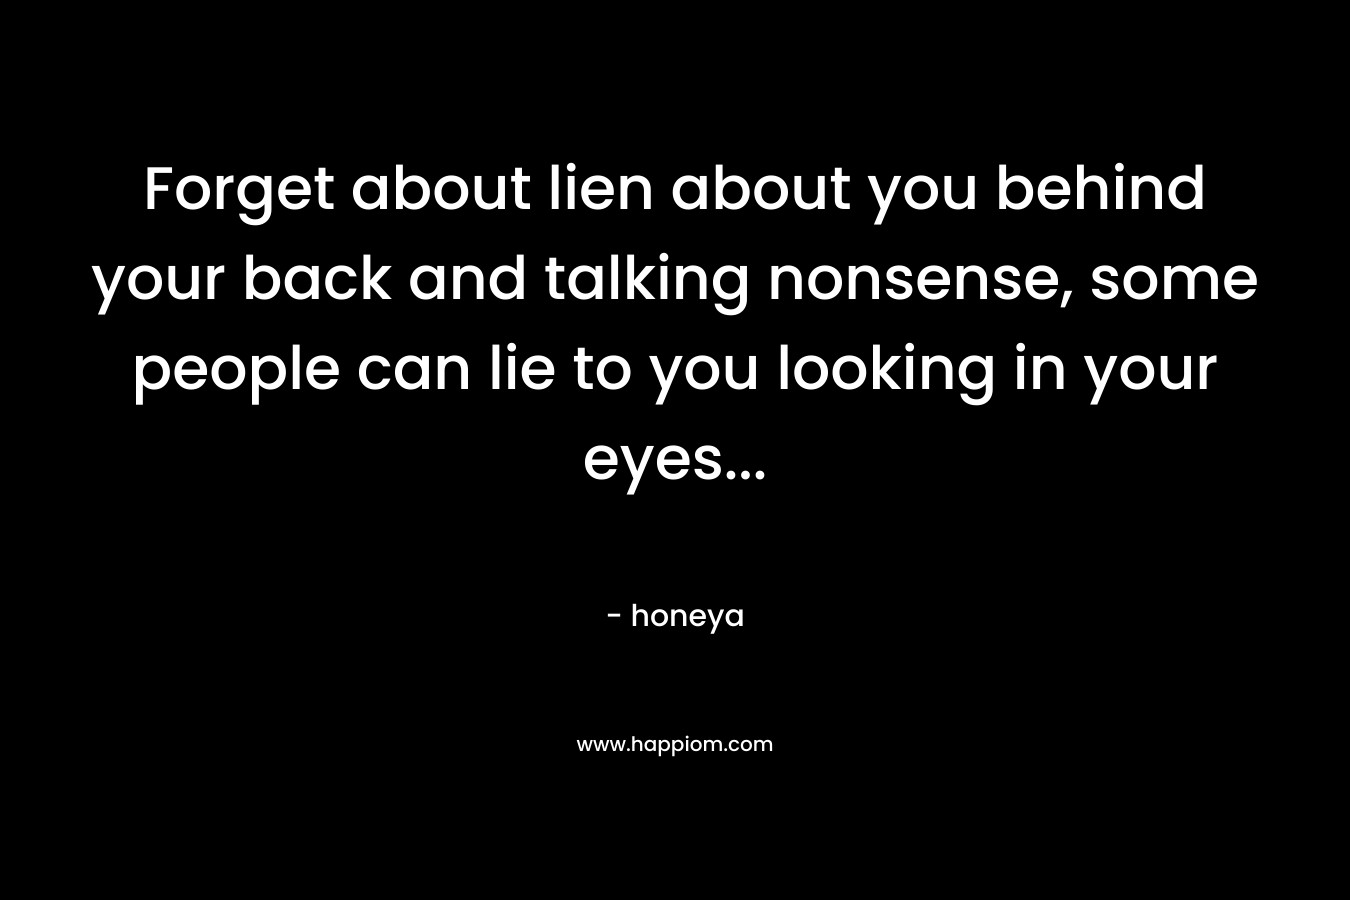 Forget about lien about you behind your back and talking nonsense, some people can lie to you looking in your eyes...